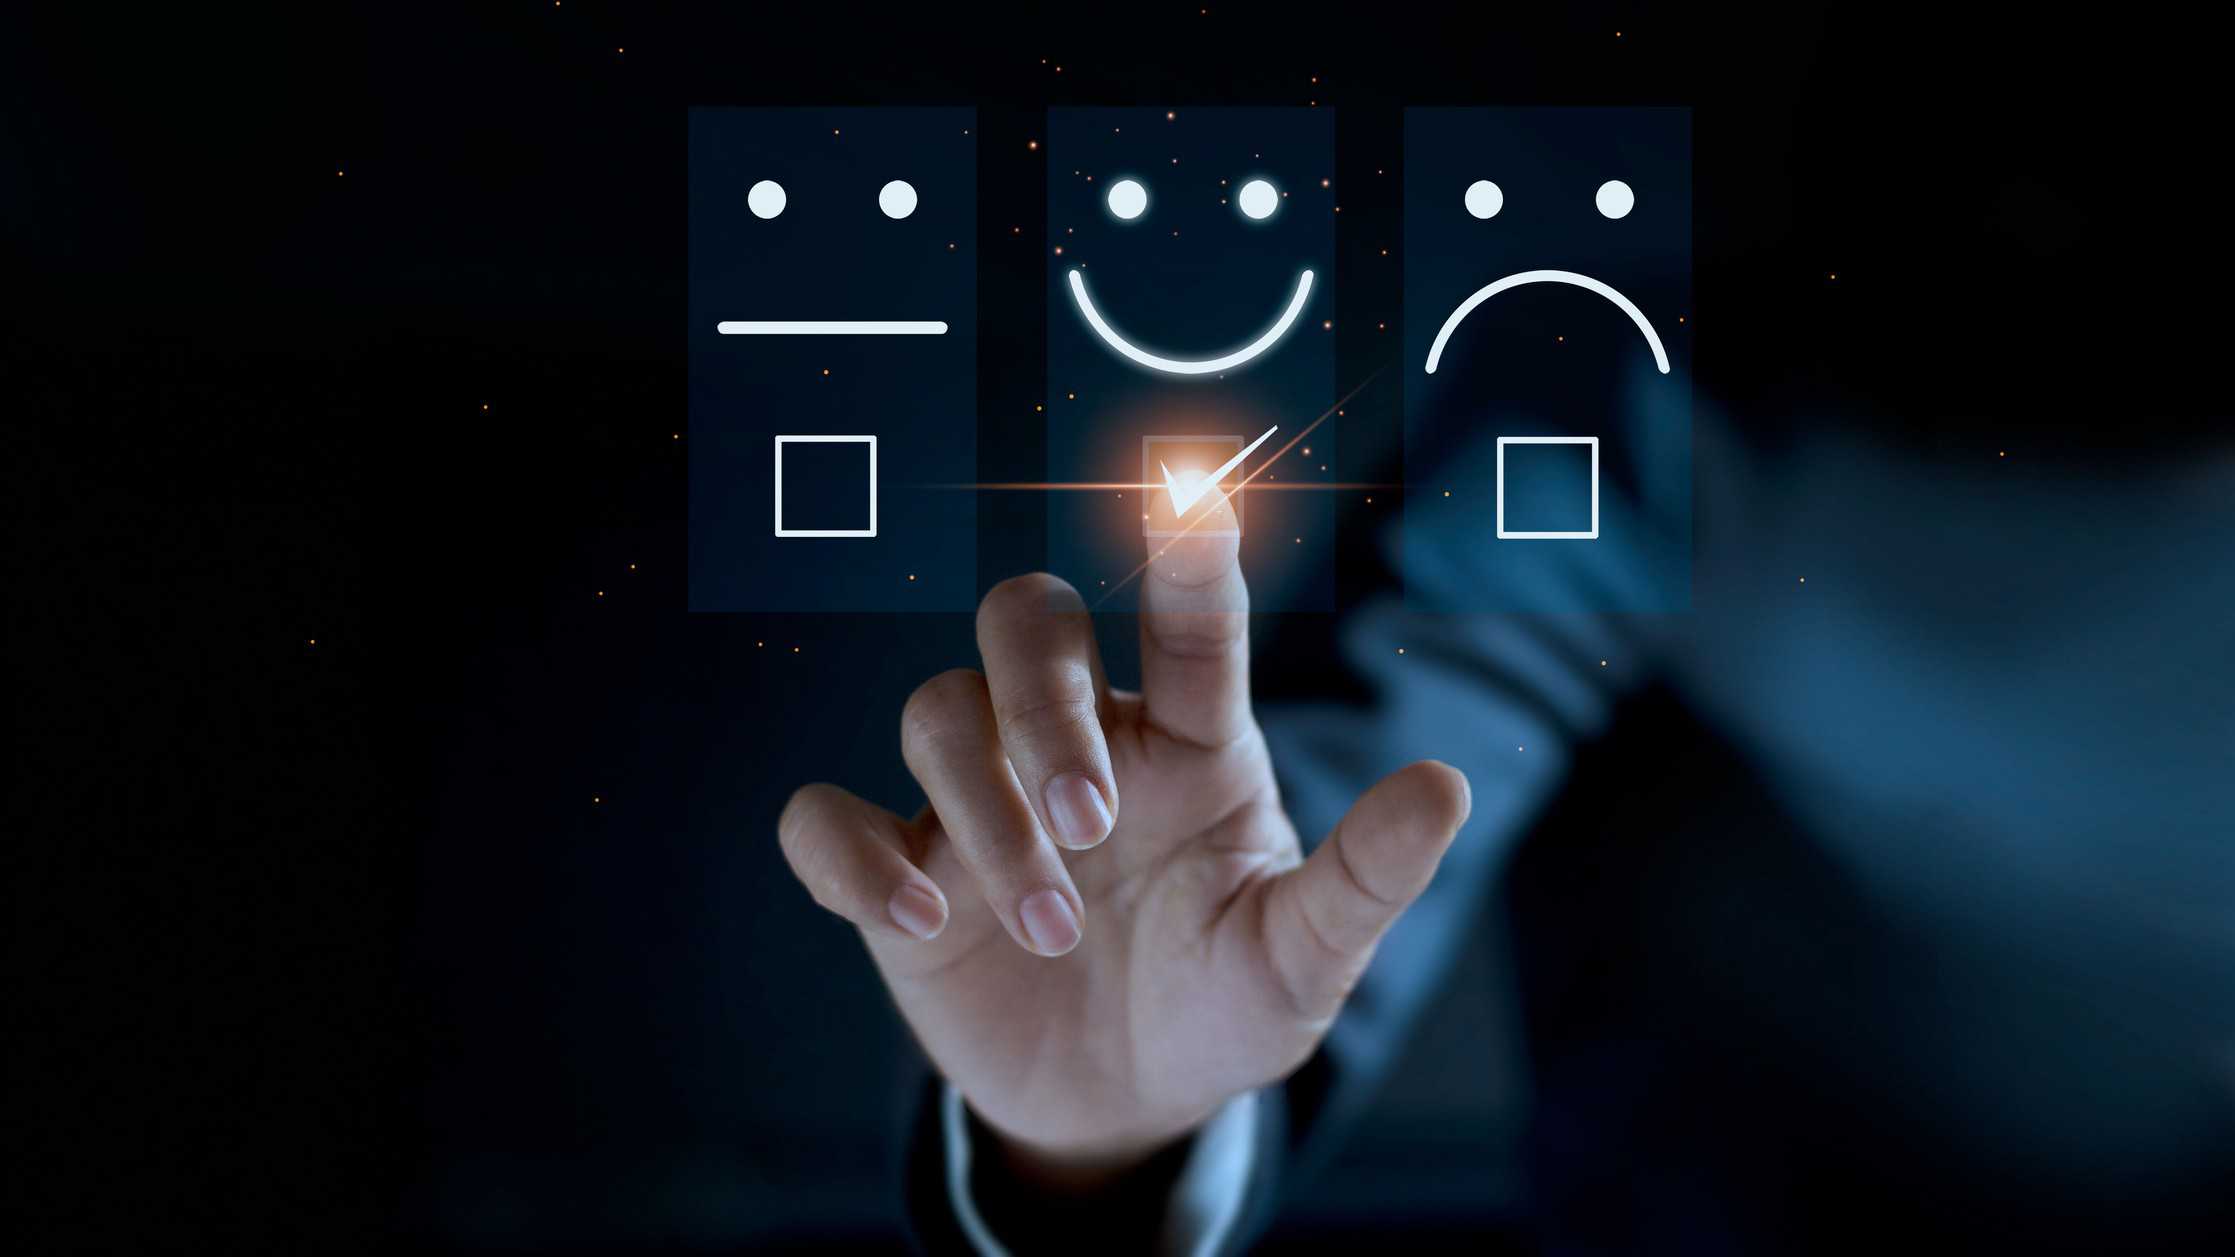 Investor touching a screen with a smiley face icon on it